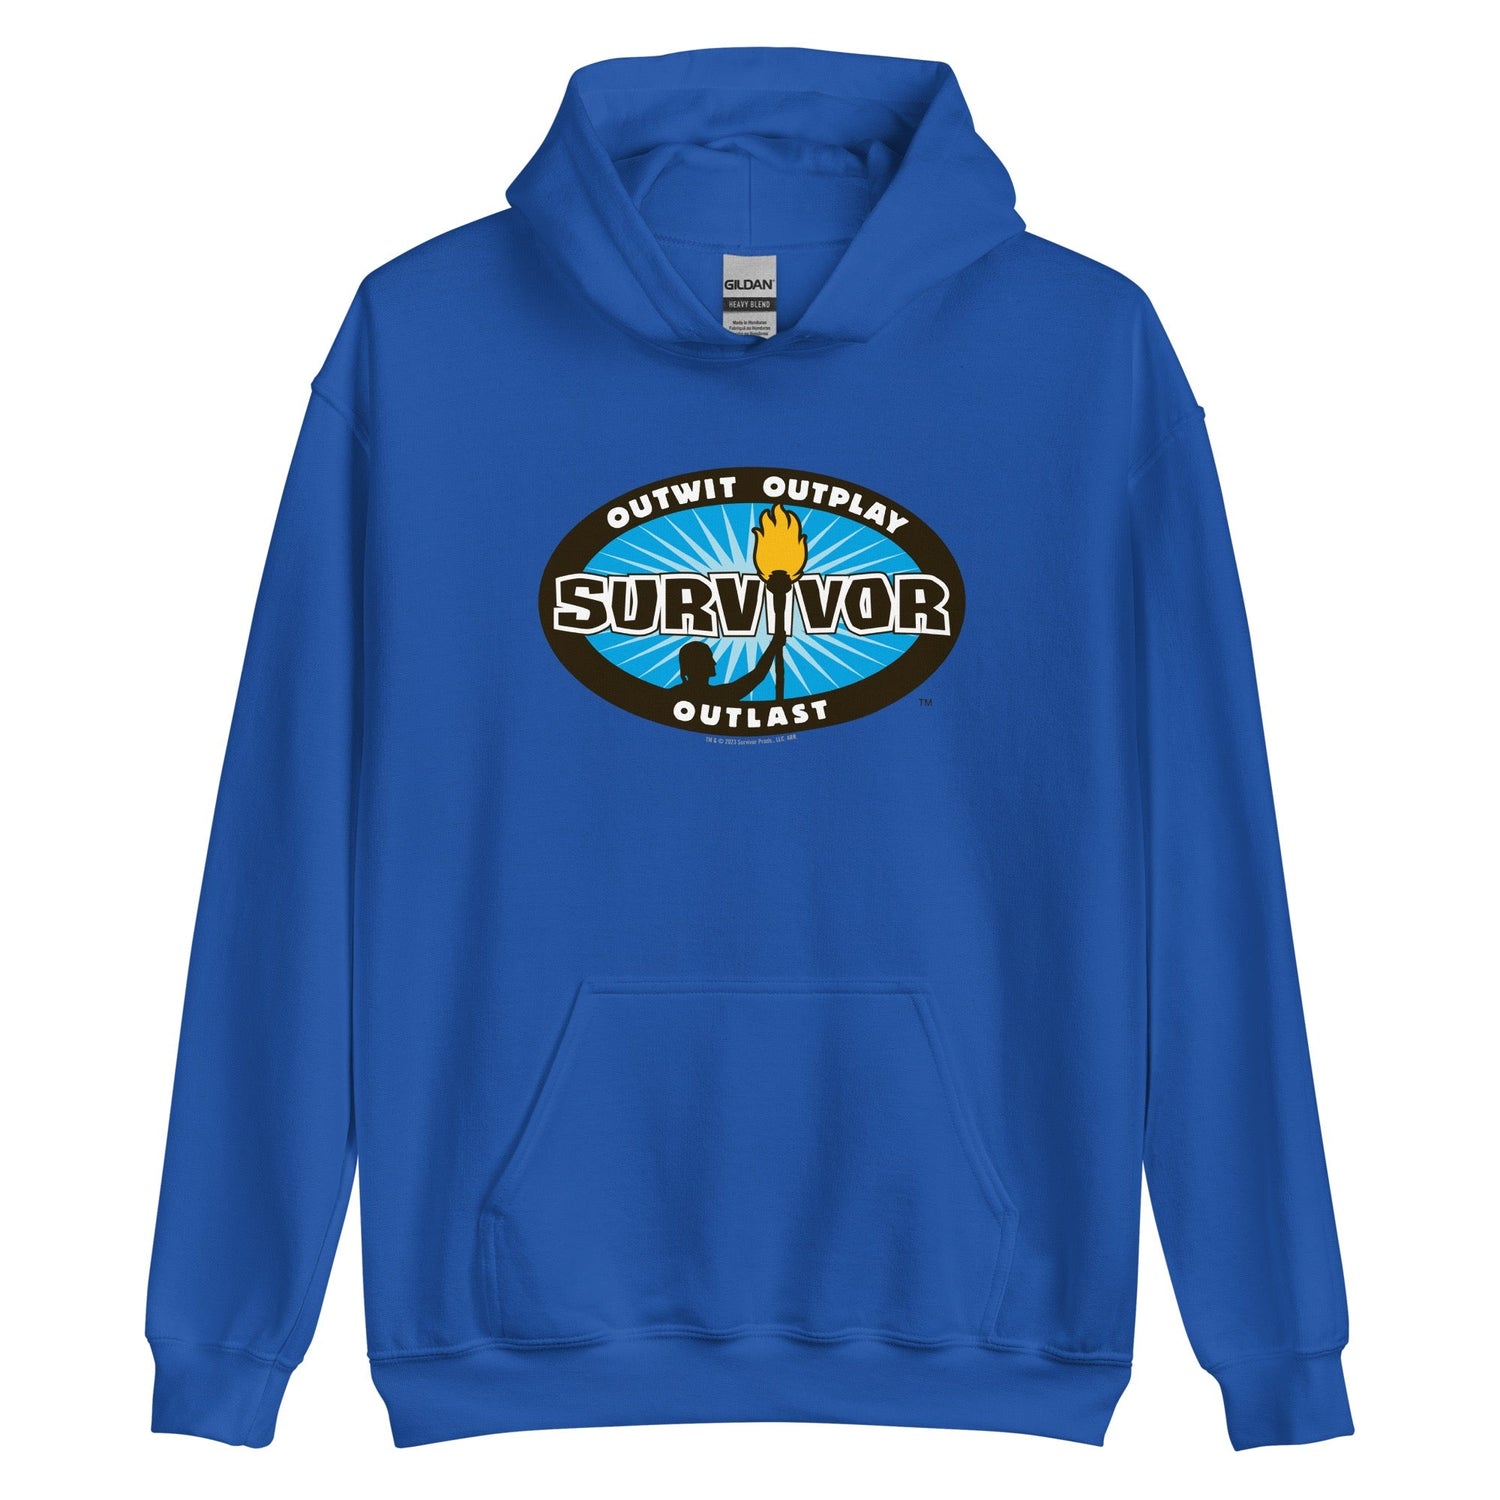 Survivor Outwit, Outplay, Outlast Logo Hooded Sweatshirt - Paramount Shop